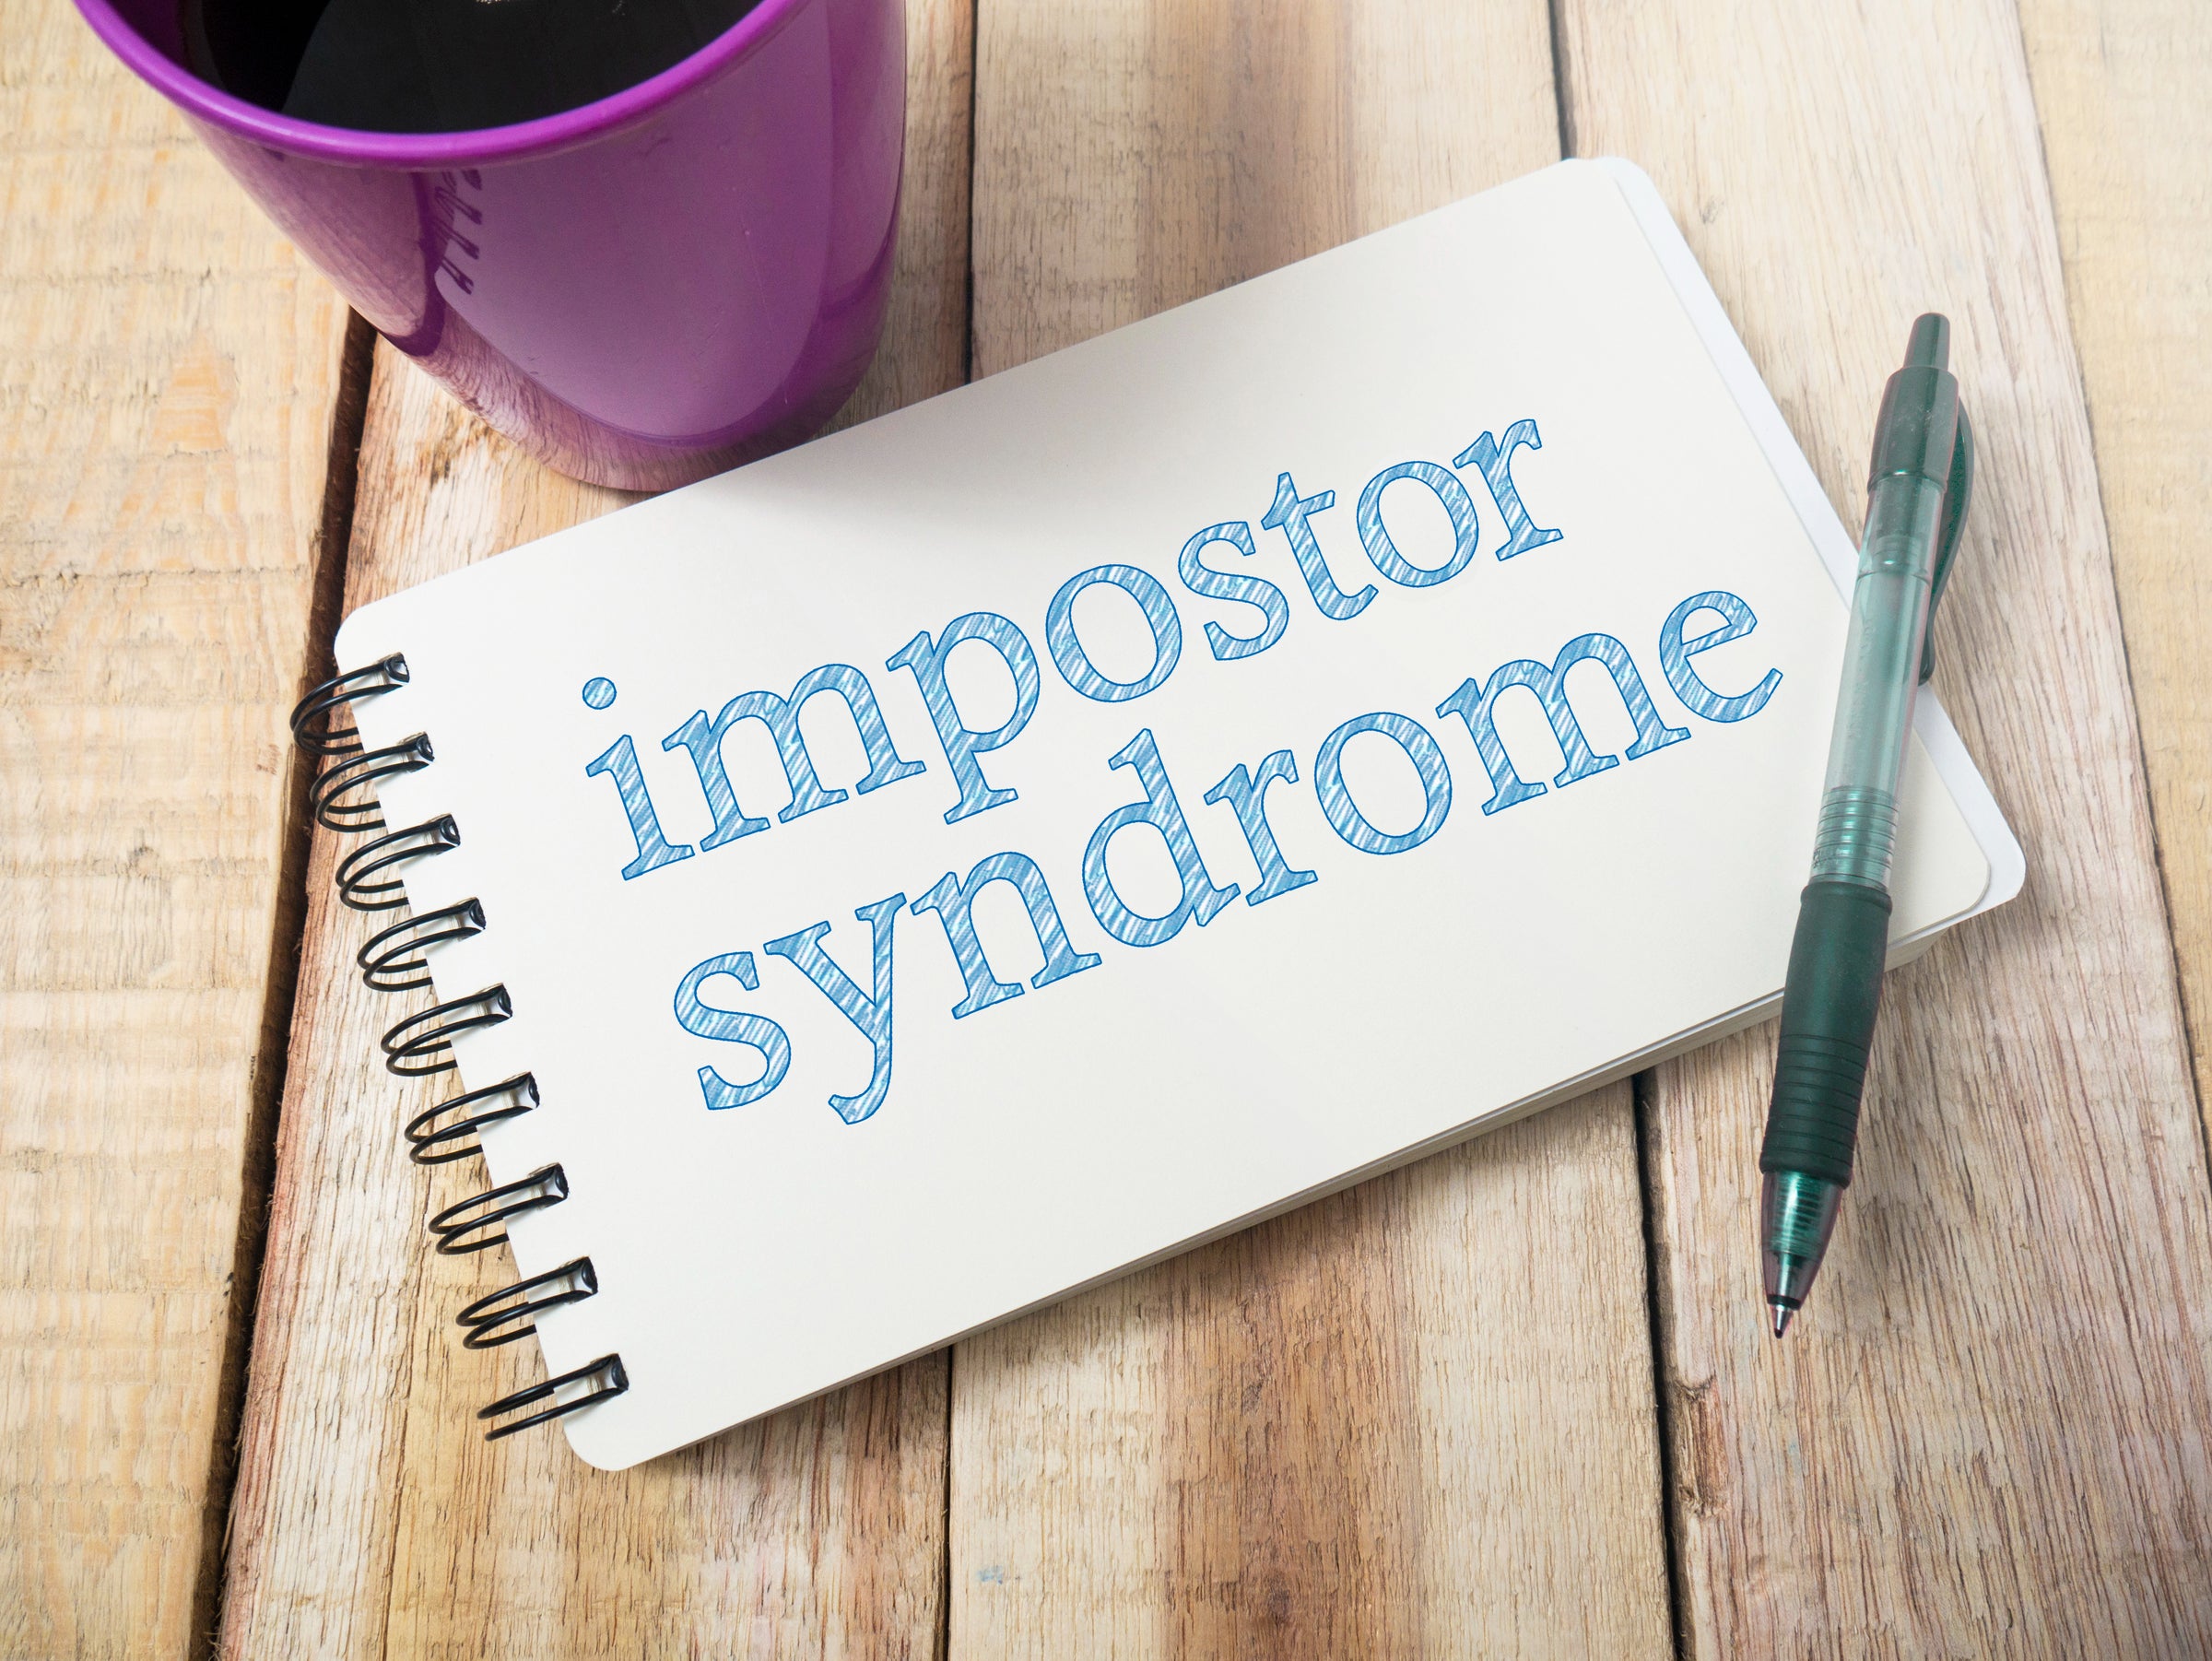 Imposter Syndrome: The Five Types, How to Deal With It